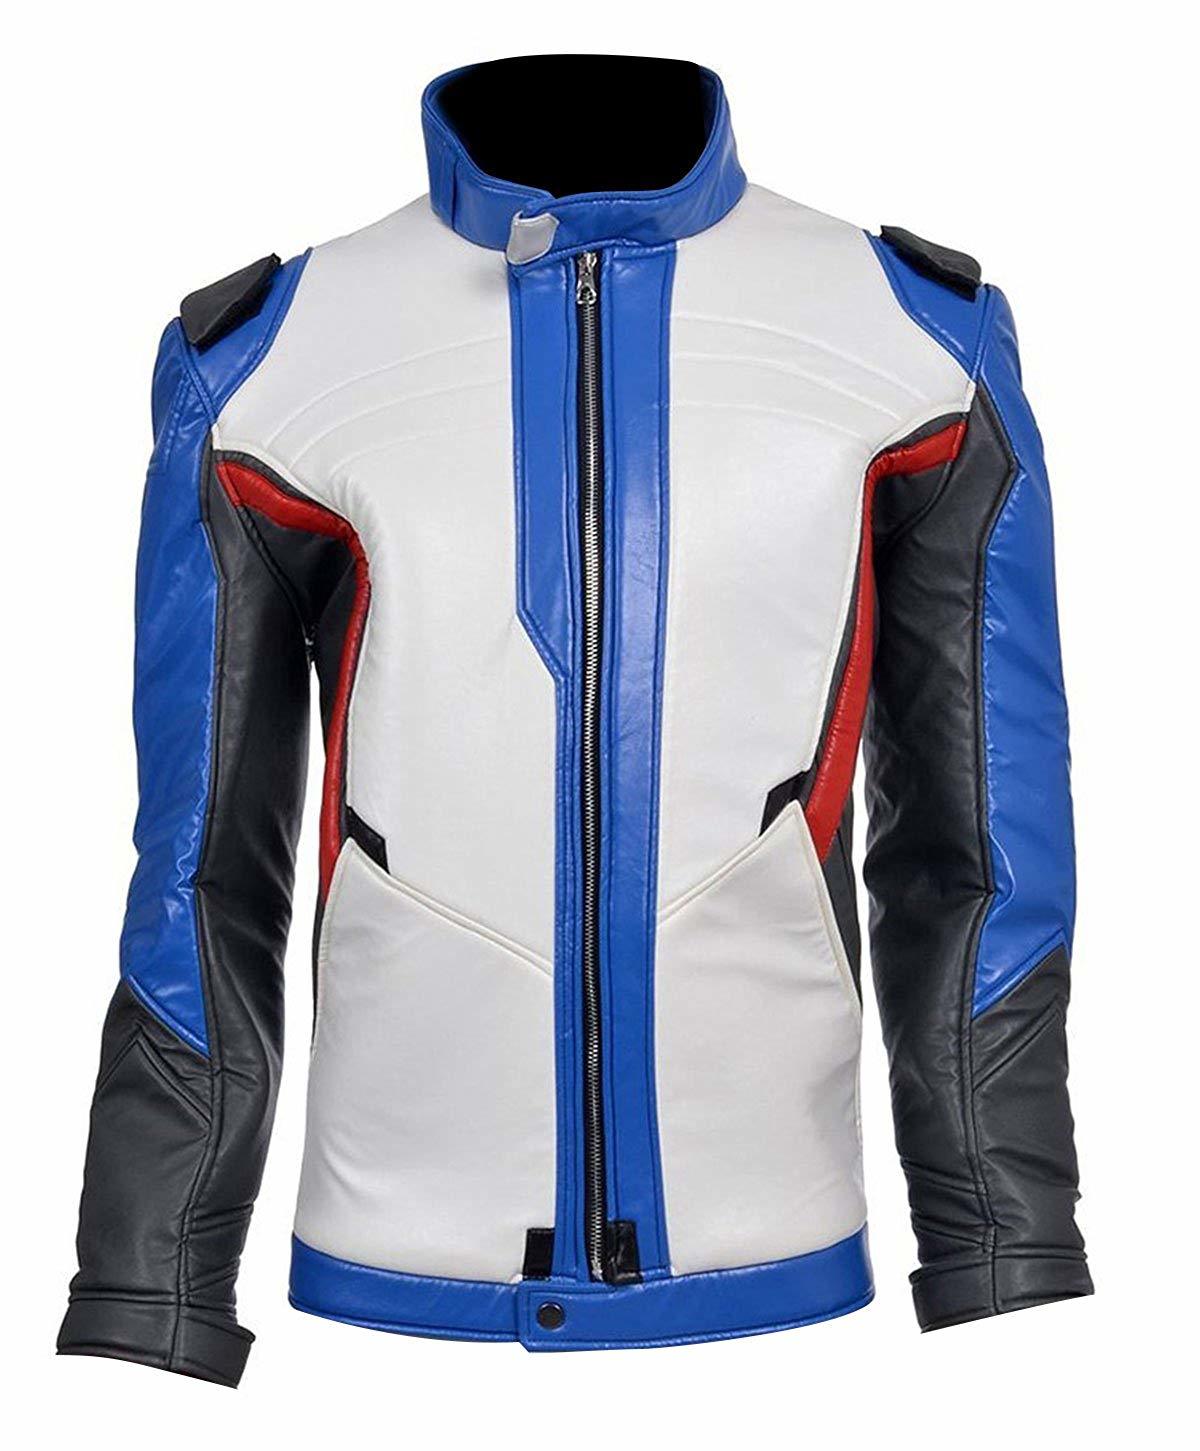 Overwatch Game Soldier 76 Biker Synthetic Leather Jacket - Coats & Jackets